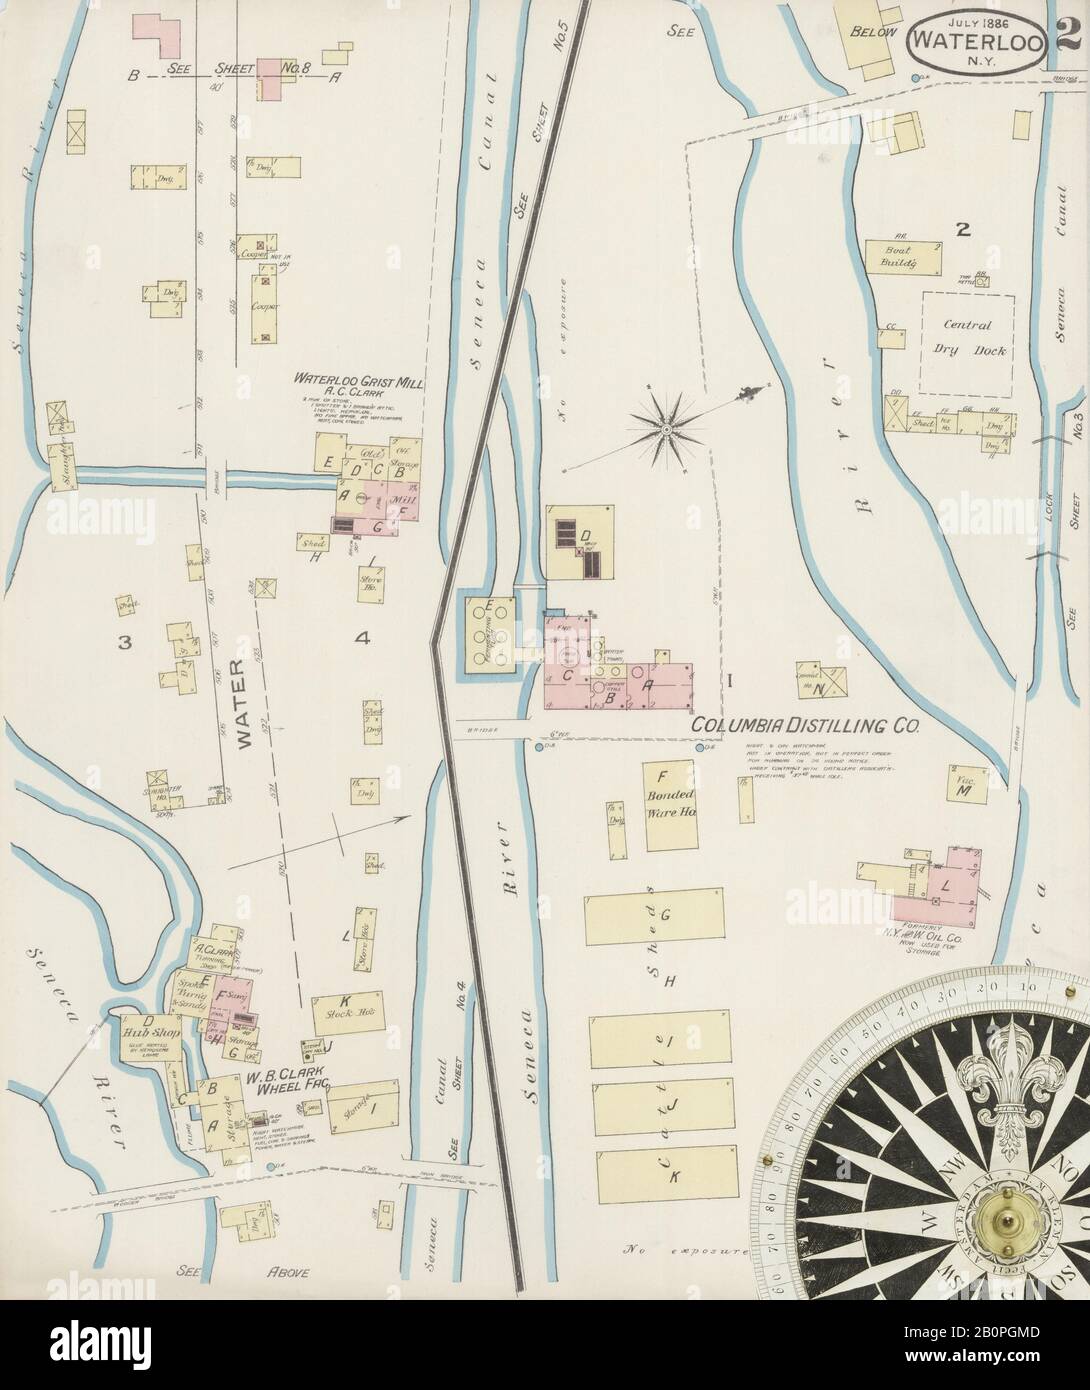 Image 2 of Sanborn Fire Insurance Map from Waterloo, Seneca County, New York. Jul 1886. 9 Sheet(s), America, street map with a Nineteenth Century compass Stock Photo